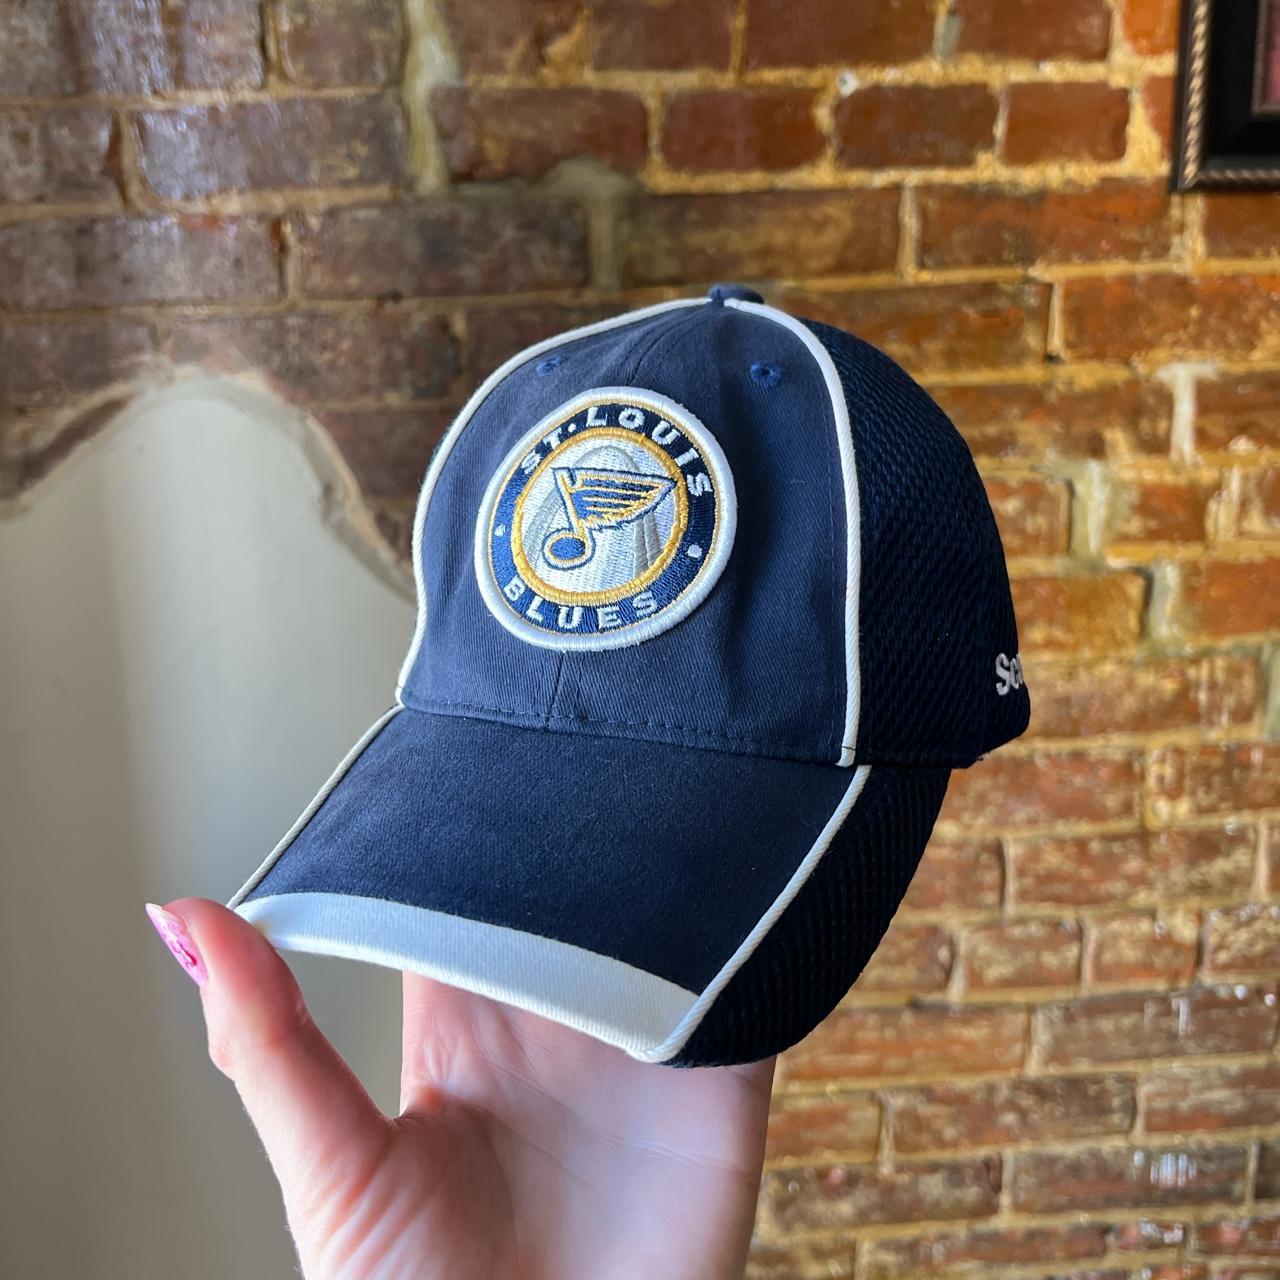 Navy blue ball cap with St. Louis Blues embroidered